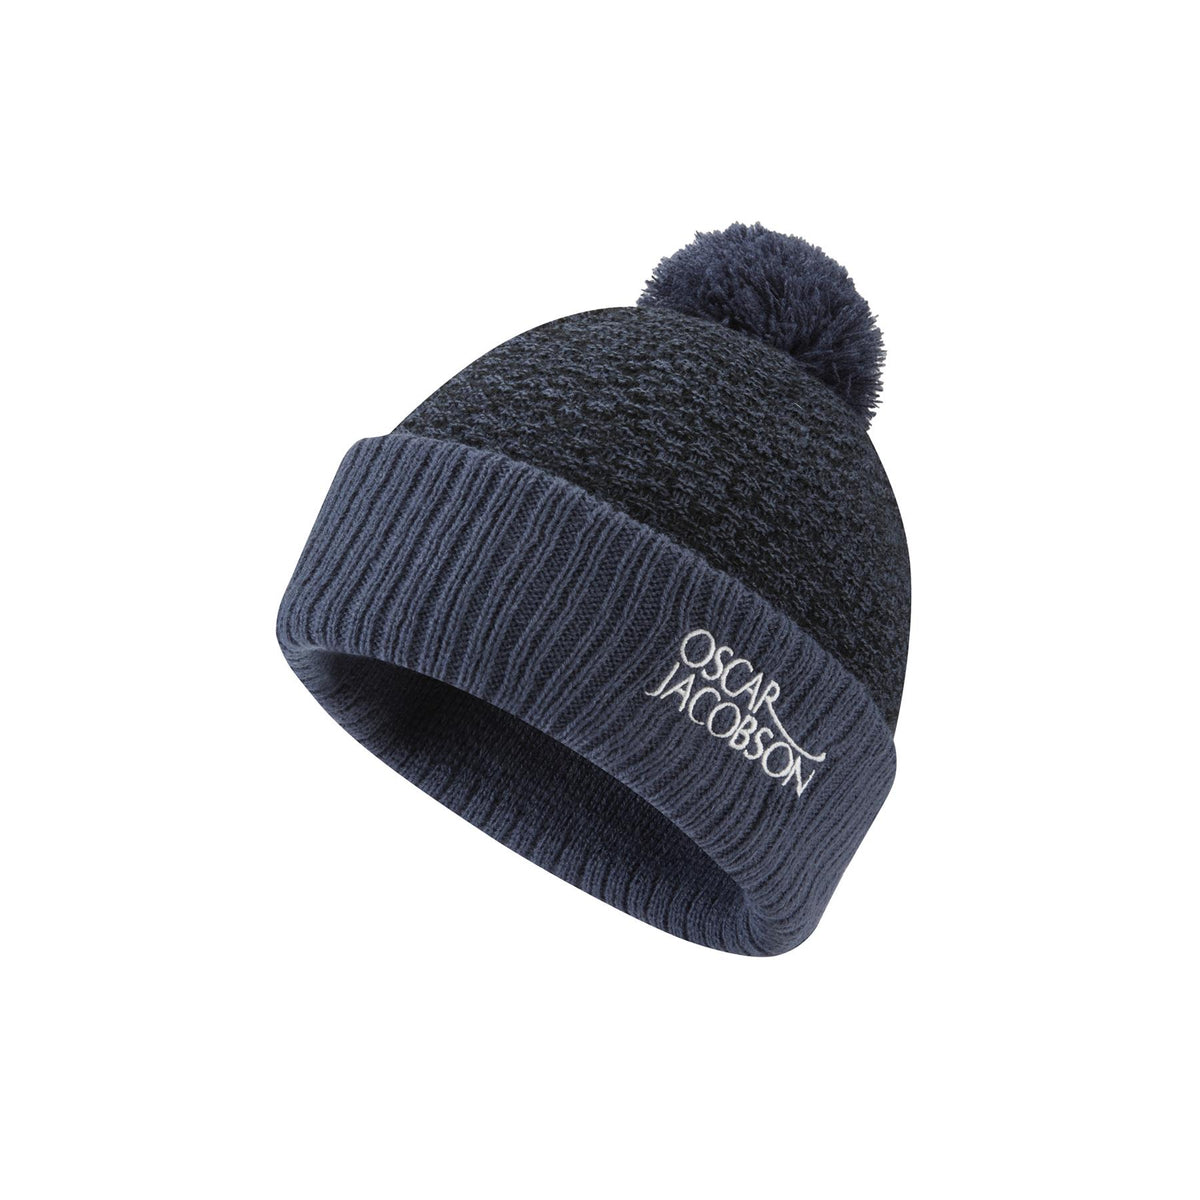 Tammis Knitted Bobble Hat